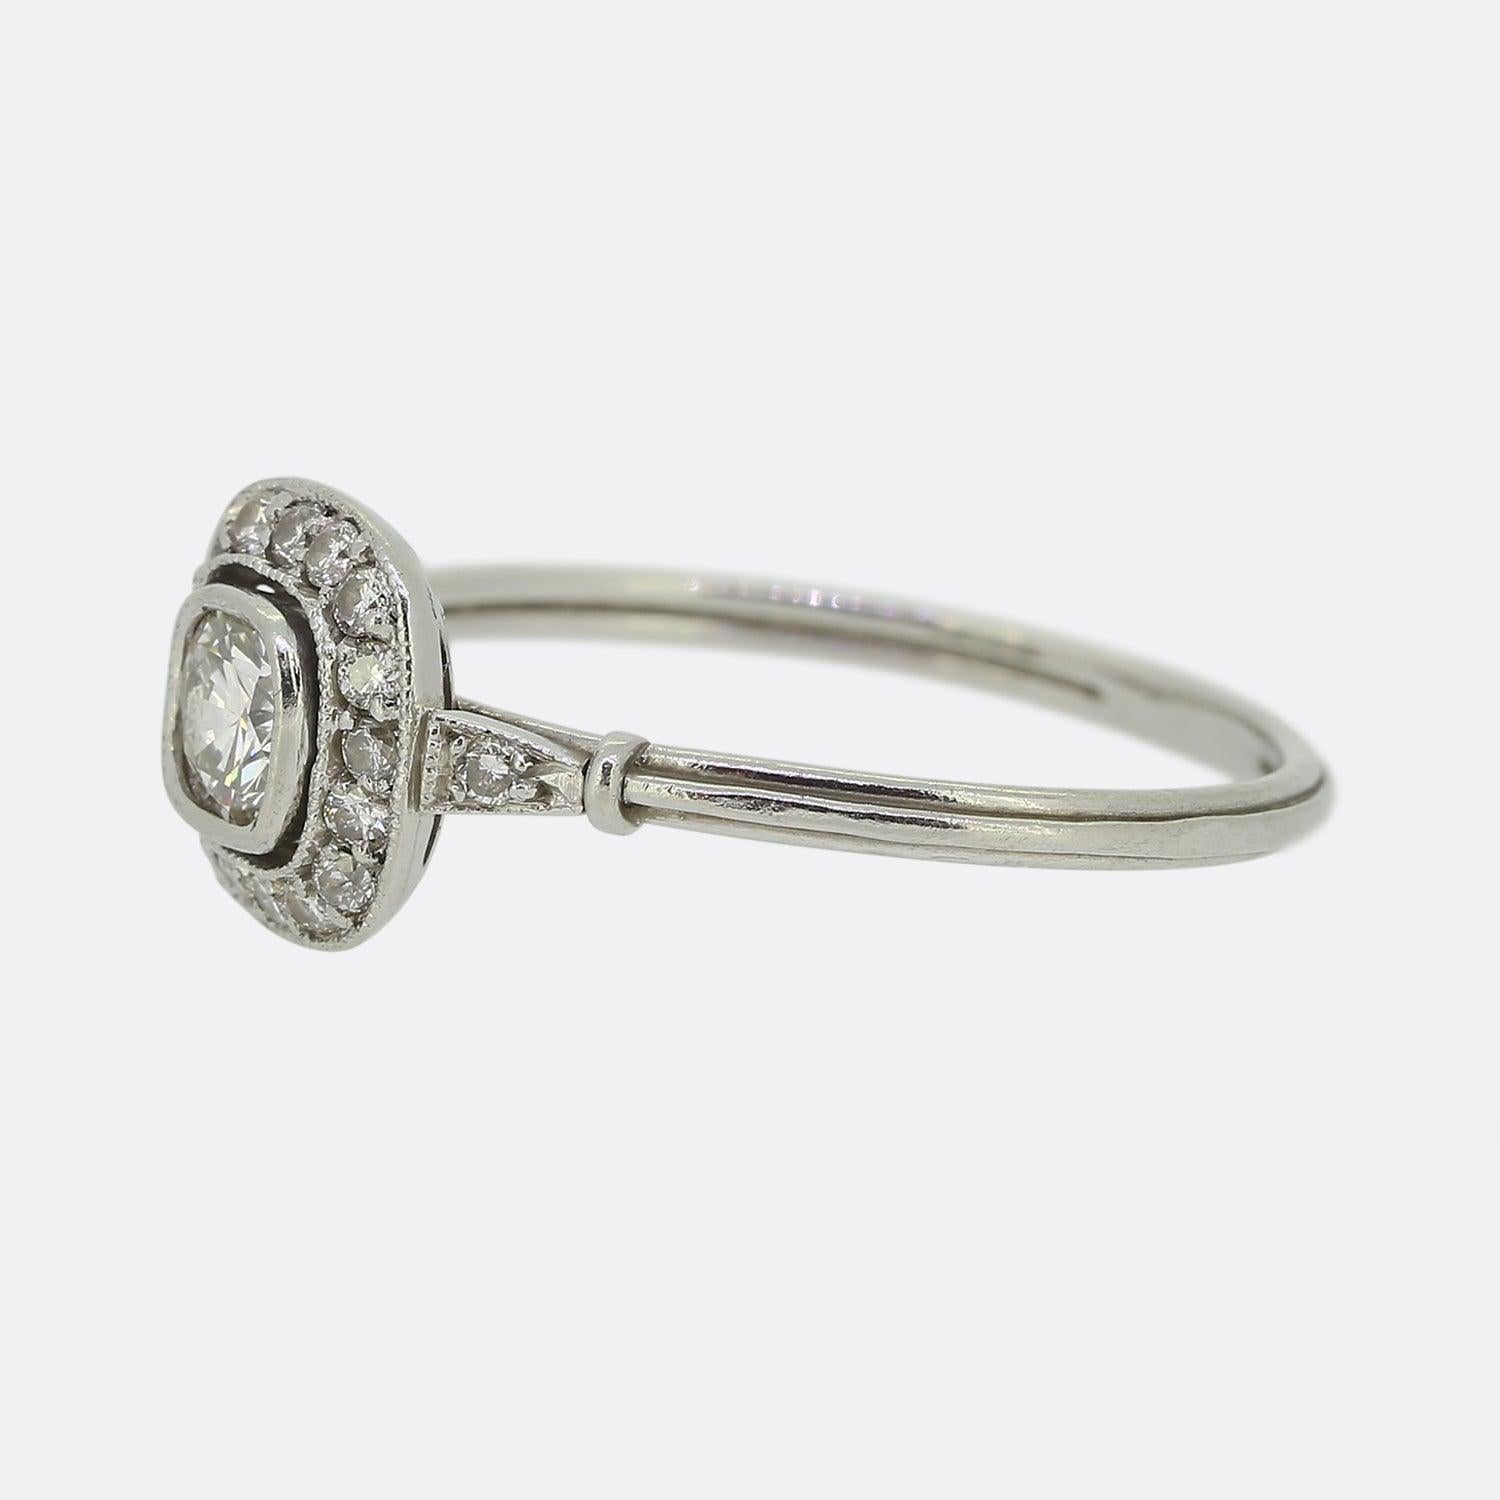 Here we have a fabulous diamond halo ring. Crafted in platinum this vintage ring features a central 0.30 carat round brilliant cut diamond which is surrounded by a border of 16 smaller diamonds. In ring has been designed in a typical Art Deco style